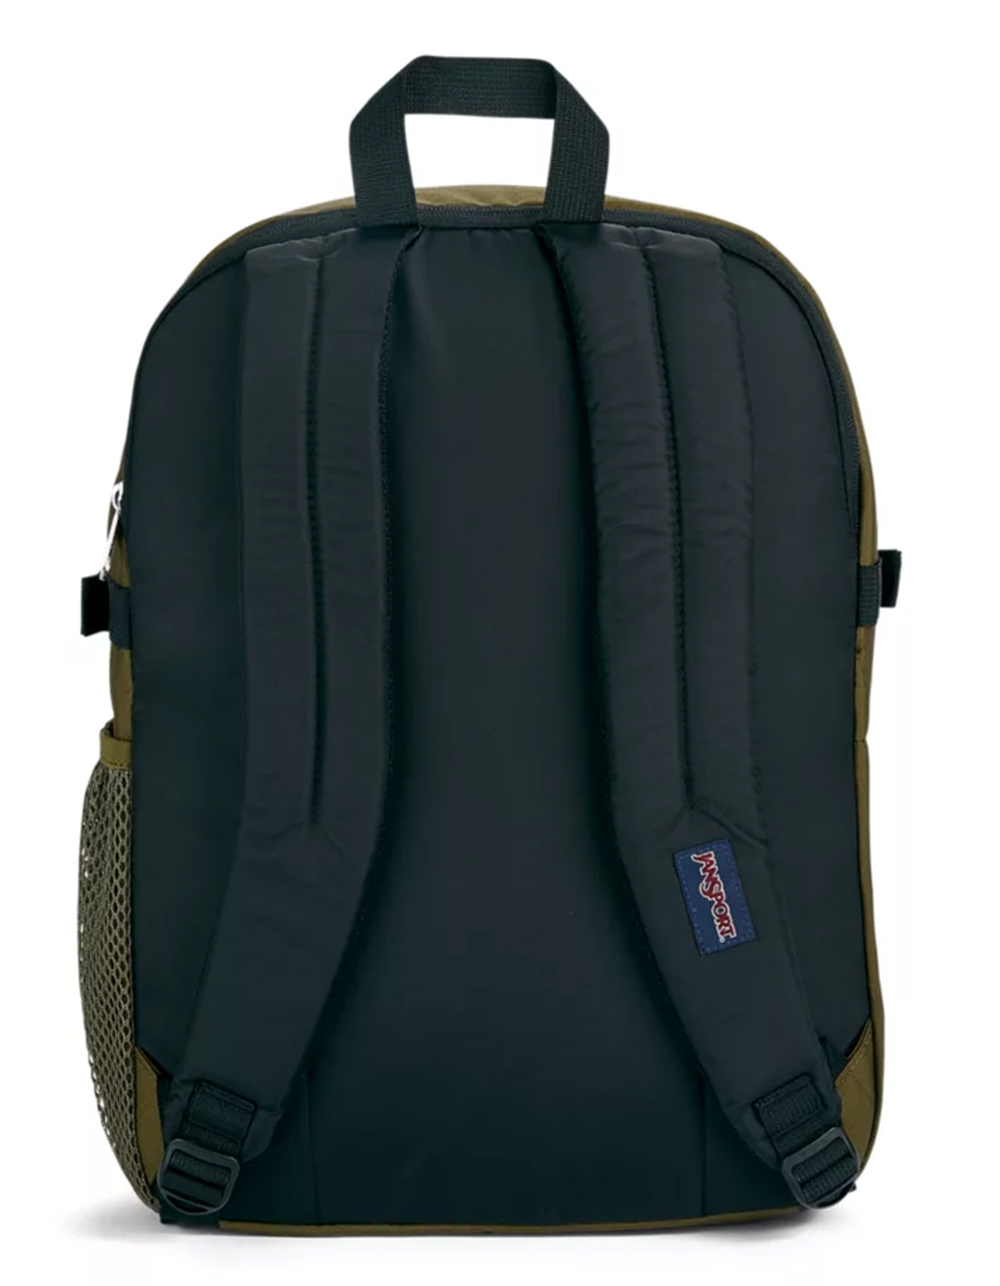 jansport main campus backpack review